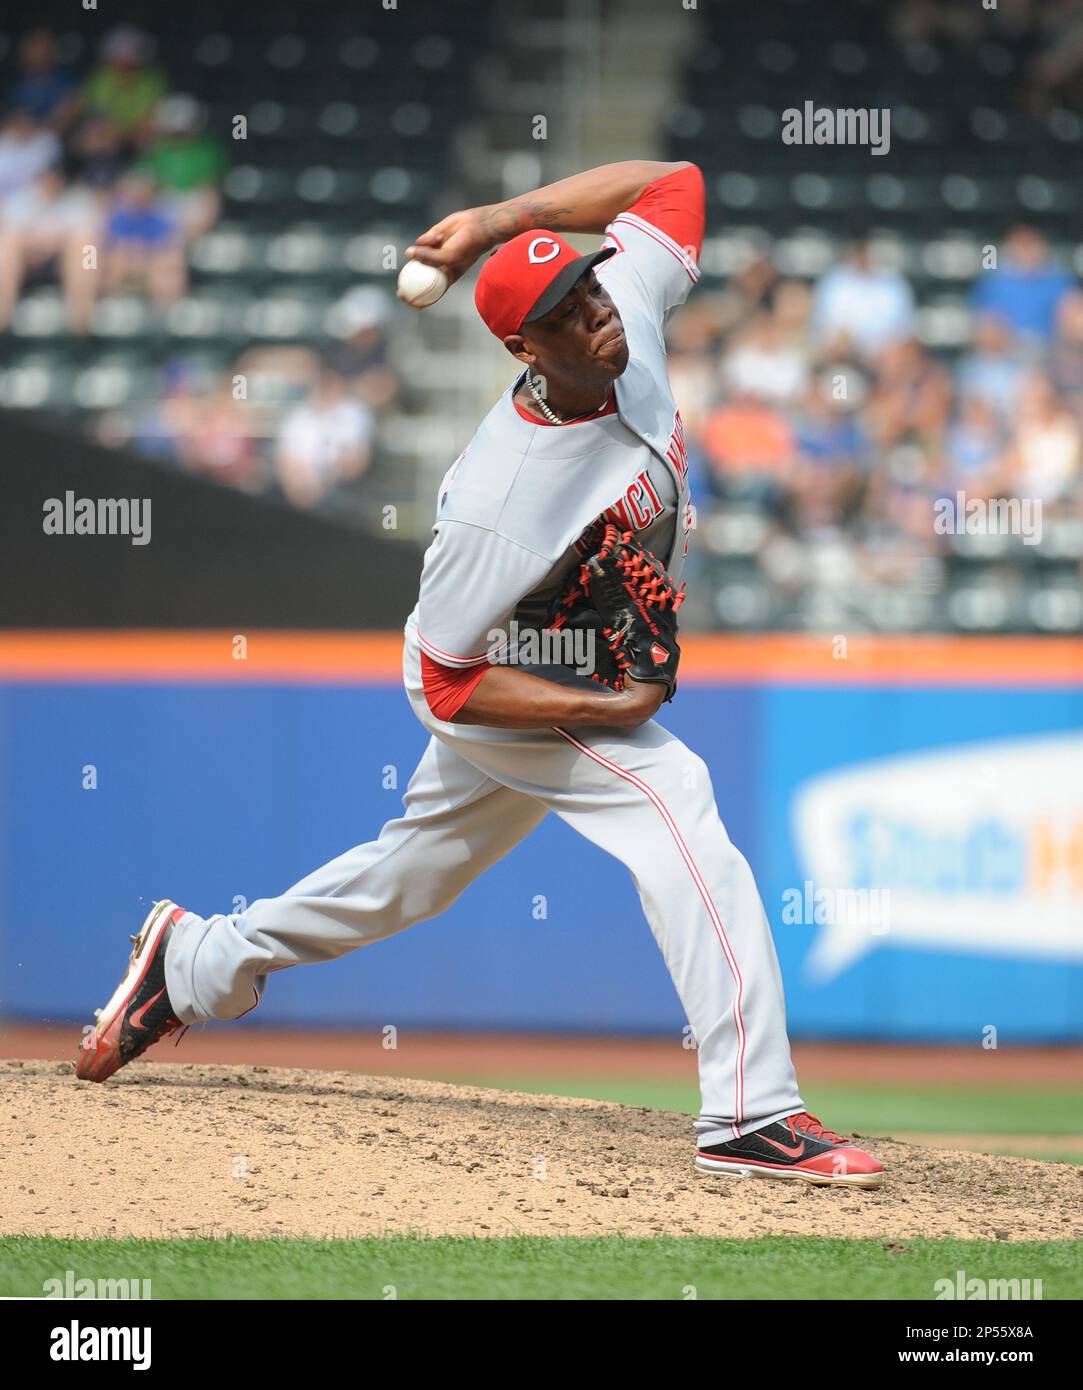 Cincinnati Reds pitcher Aroldis Chapman (54) during game against the New  York Mets at Citi Field in Queens, New York; May 22, 2013. Reds defeated  Mets 7-4. (AP Photo/Tomasso DeRosa Stock Photo - Alamy